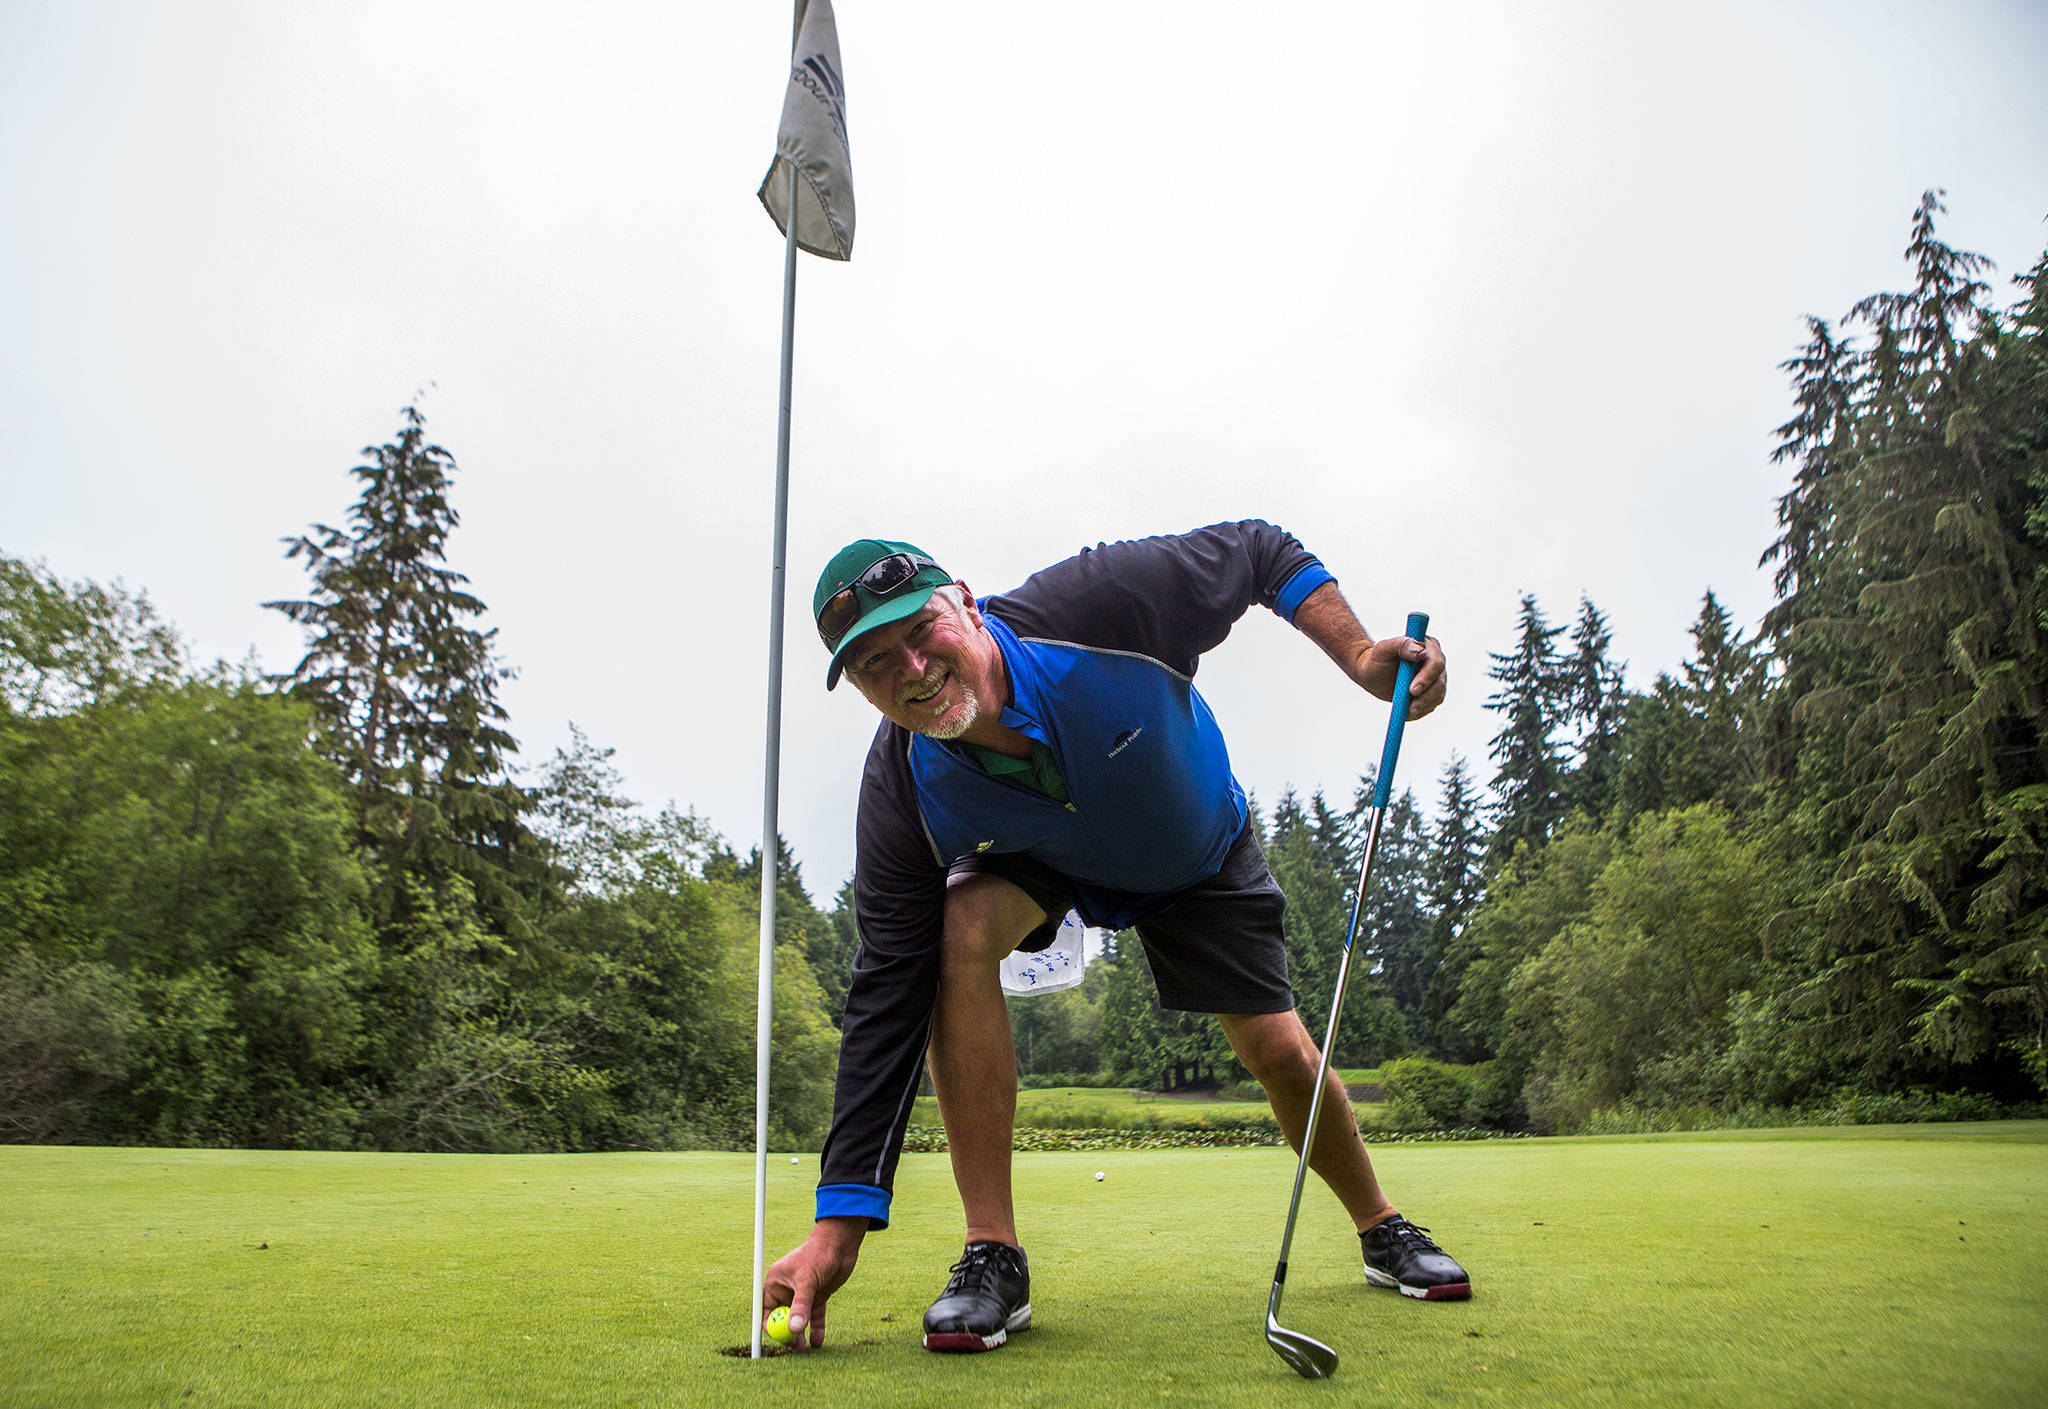 Wayne Lauerman at the 7th hole at Harbour Pointe Golf Club in Mukilteo where he made one of two holes-in-one one month apart in May and June. (Olivia Vanni / The Herald)